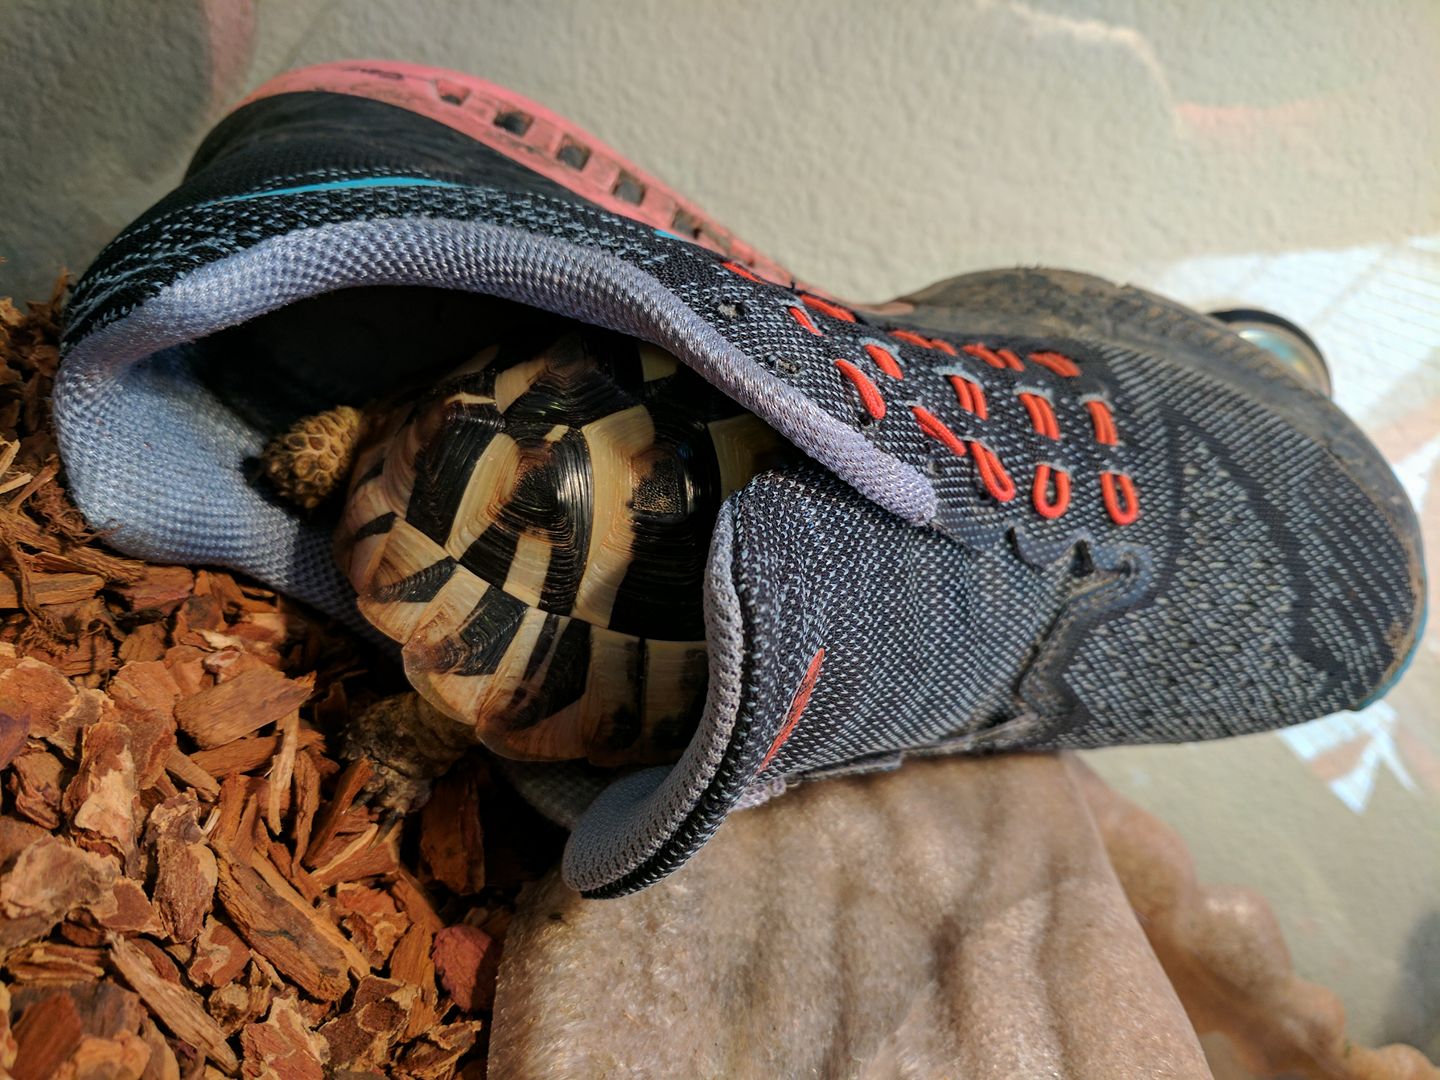 Rover explores my old shoe